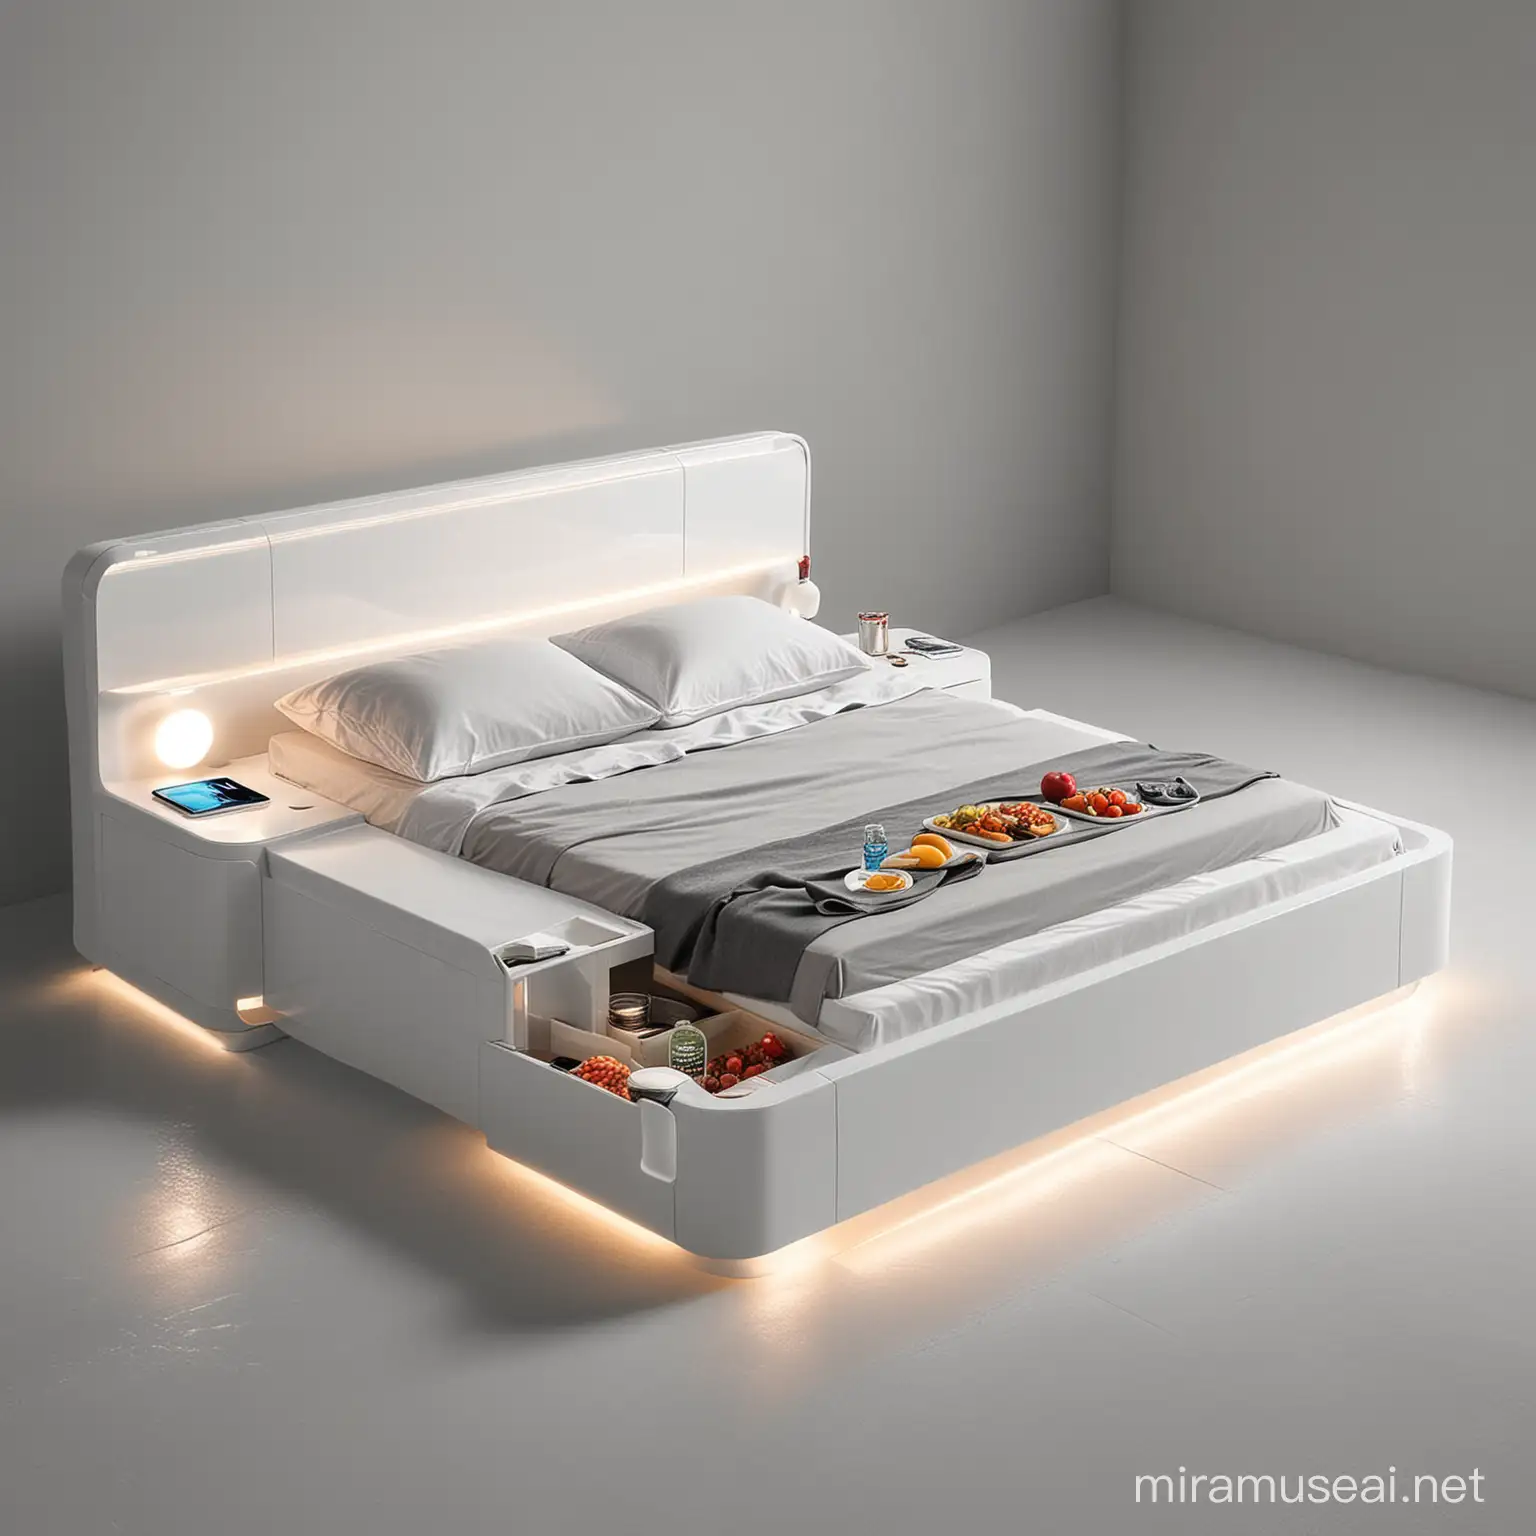  modern technology bed with place to cool and store food.
